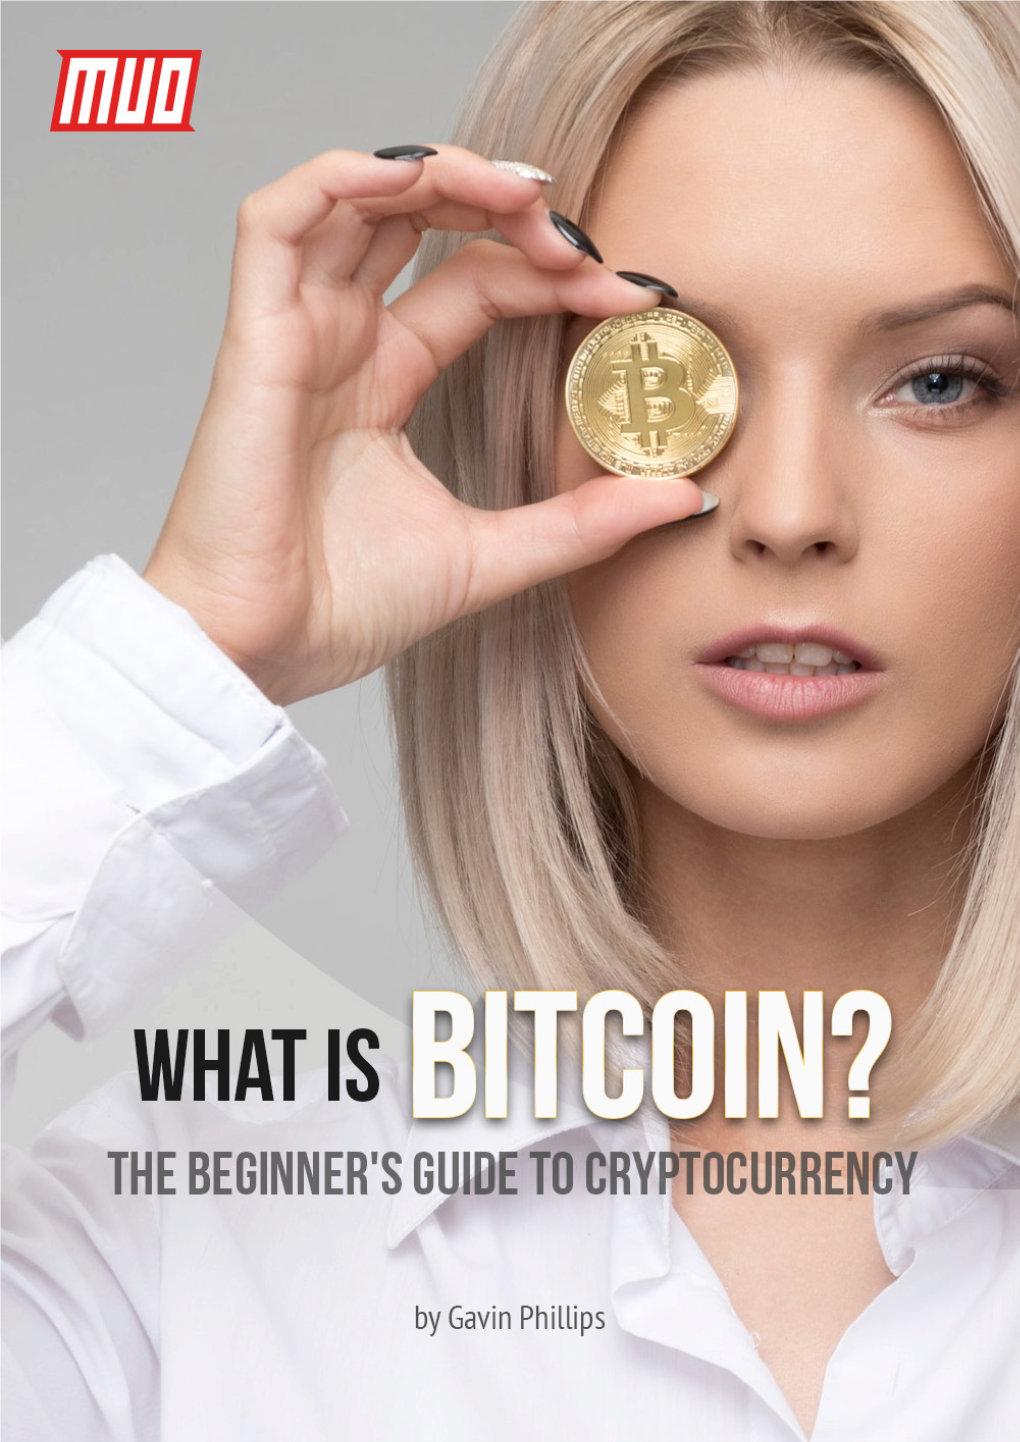 What Is Bitcoin? the Beginner's Guide to Cryptocurrency